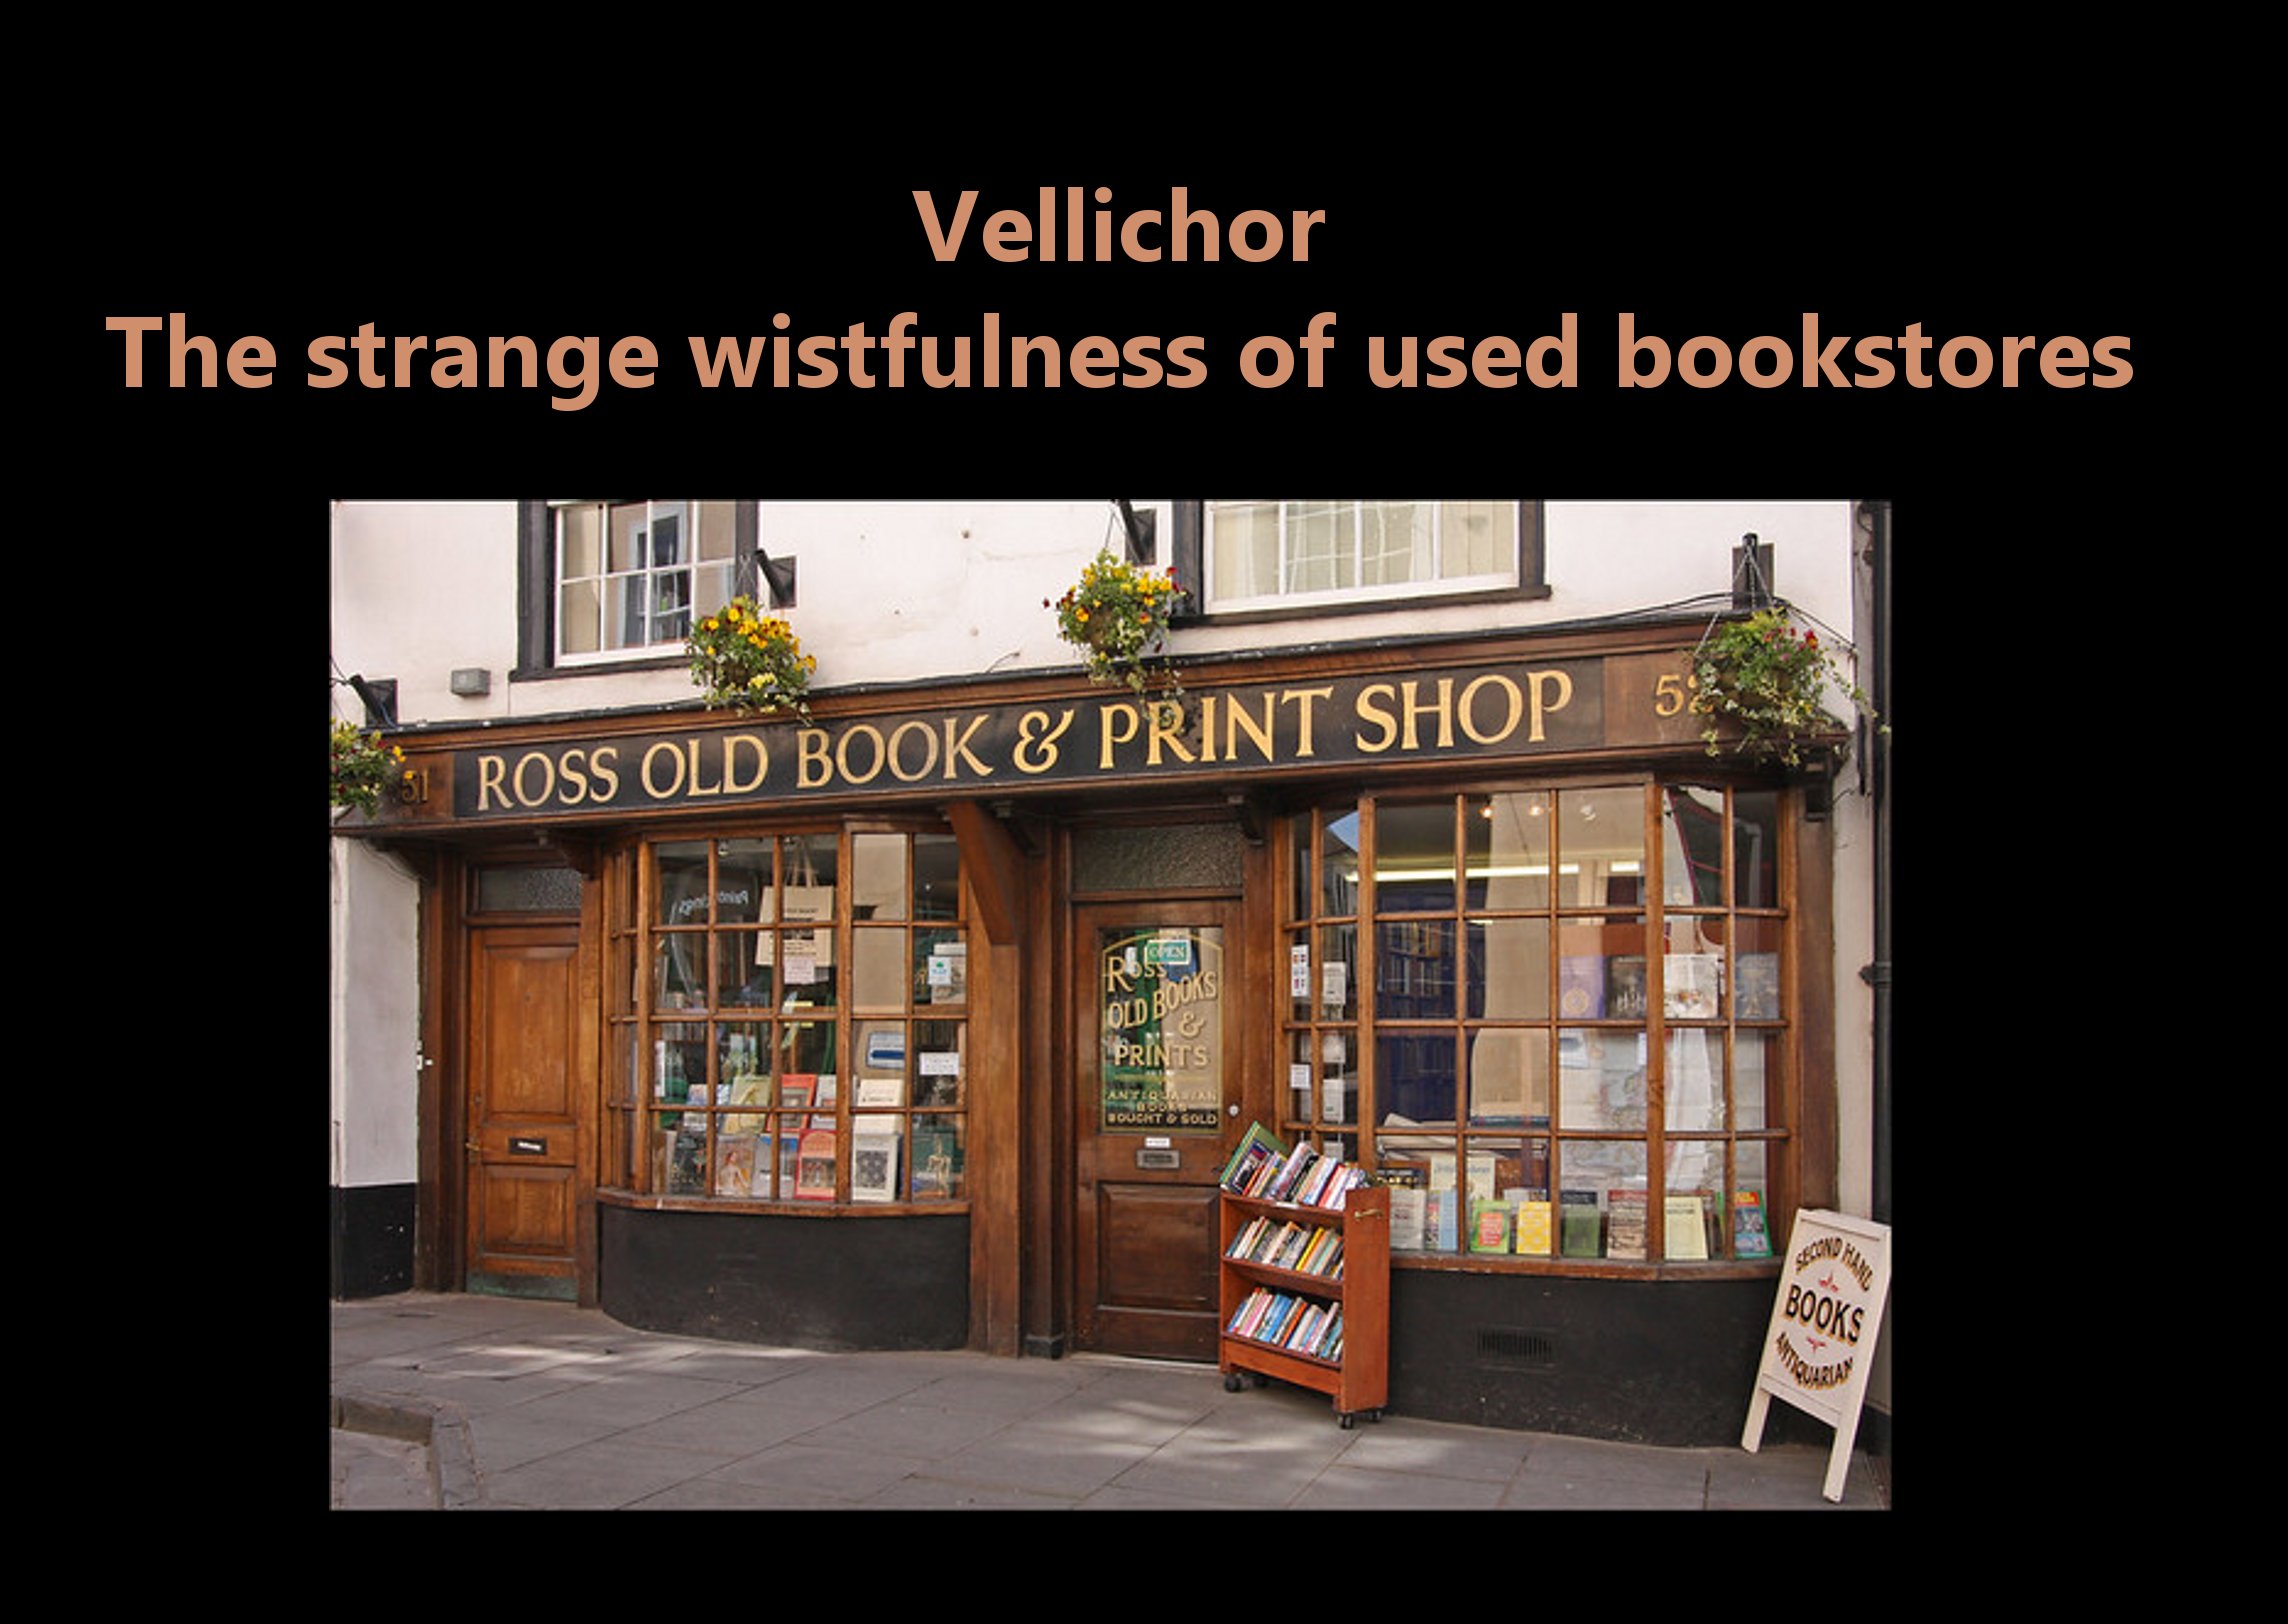 old book shop - Vellichor The strange wistfulness of used bookstores Ross Old Book & Print Shop 58. Od 8 Old Books Prints Teraan Oucit Sold Books